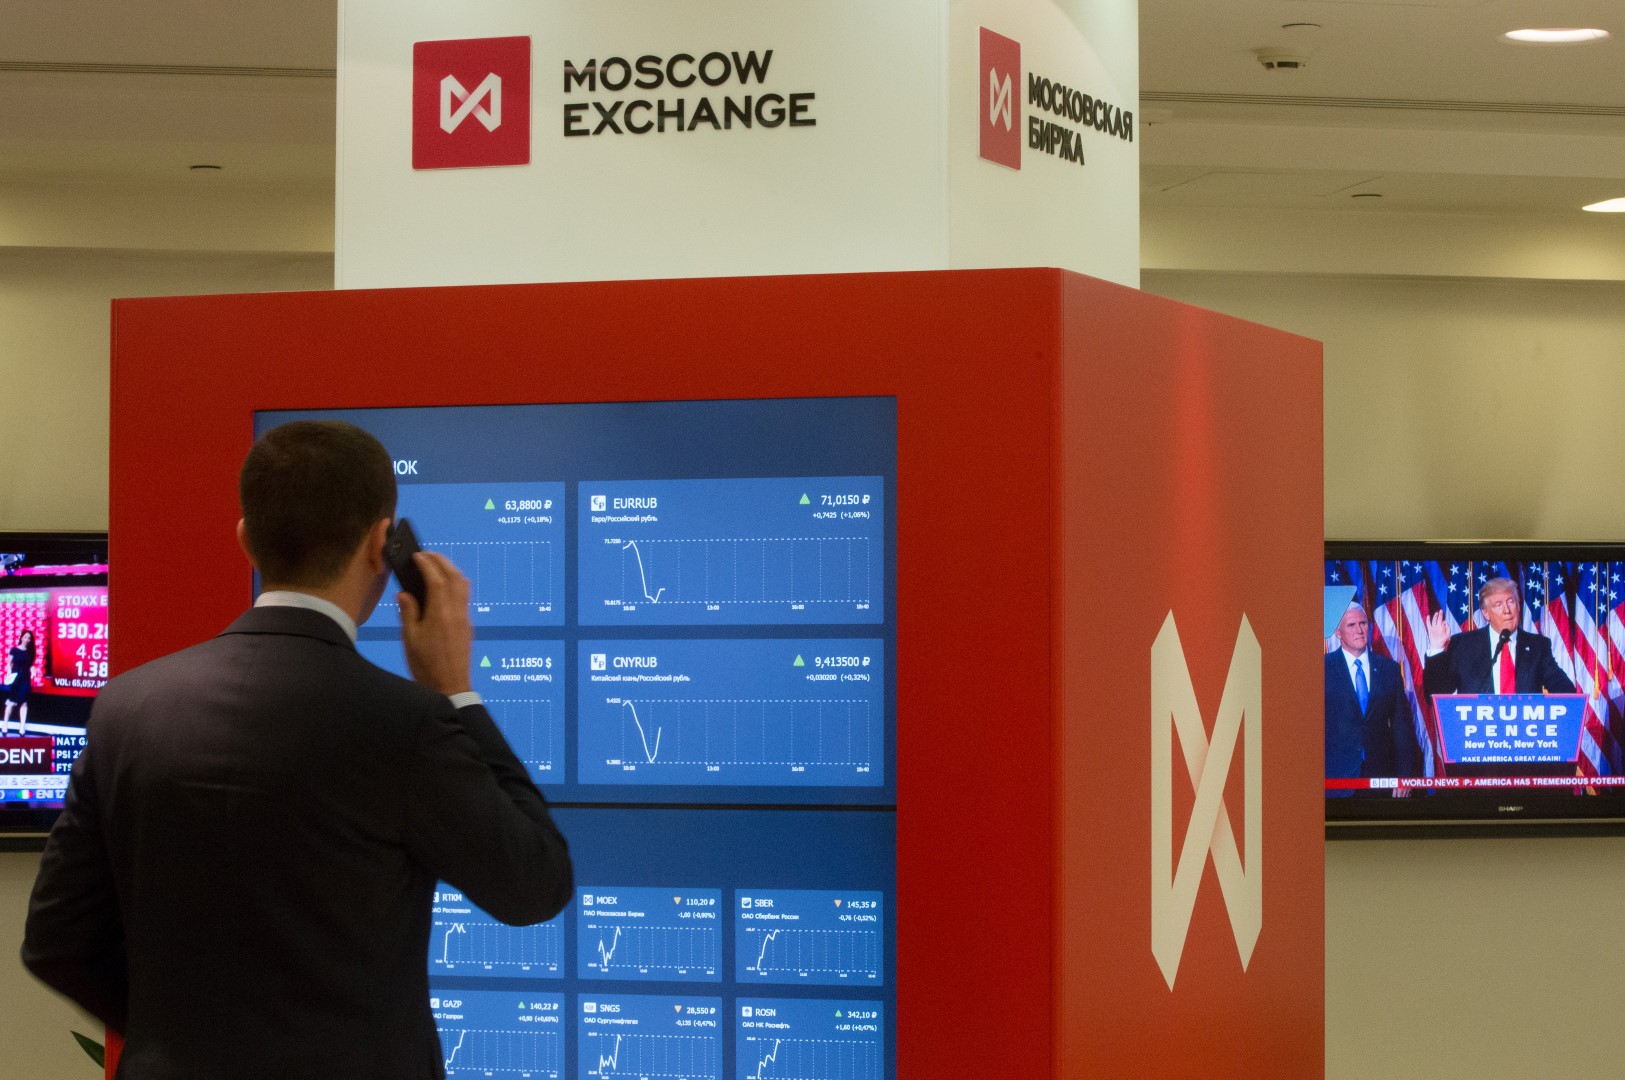 A visitor speaks on a smartphone while looking at financial information screens showing market reaction to the U.S. presidential election results at the Moscow Exchange in Moscow, Russia, Nov. 9, 2016. The ruble dropped as Donald Trump won the U.S. presidential race, driving down crude prices on concern his protectionist policies will sap global growth. Photographer: Andrey Rudakov/Bloomberg